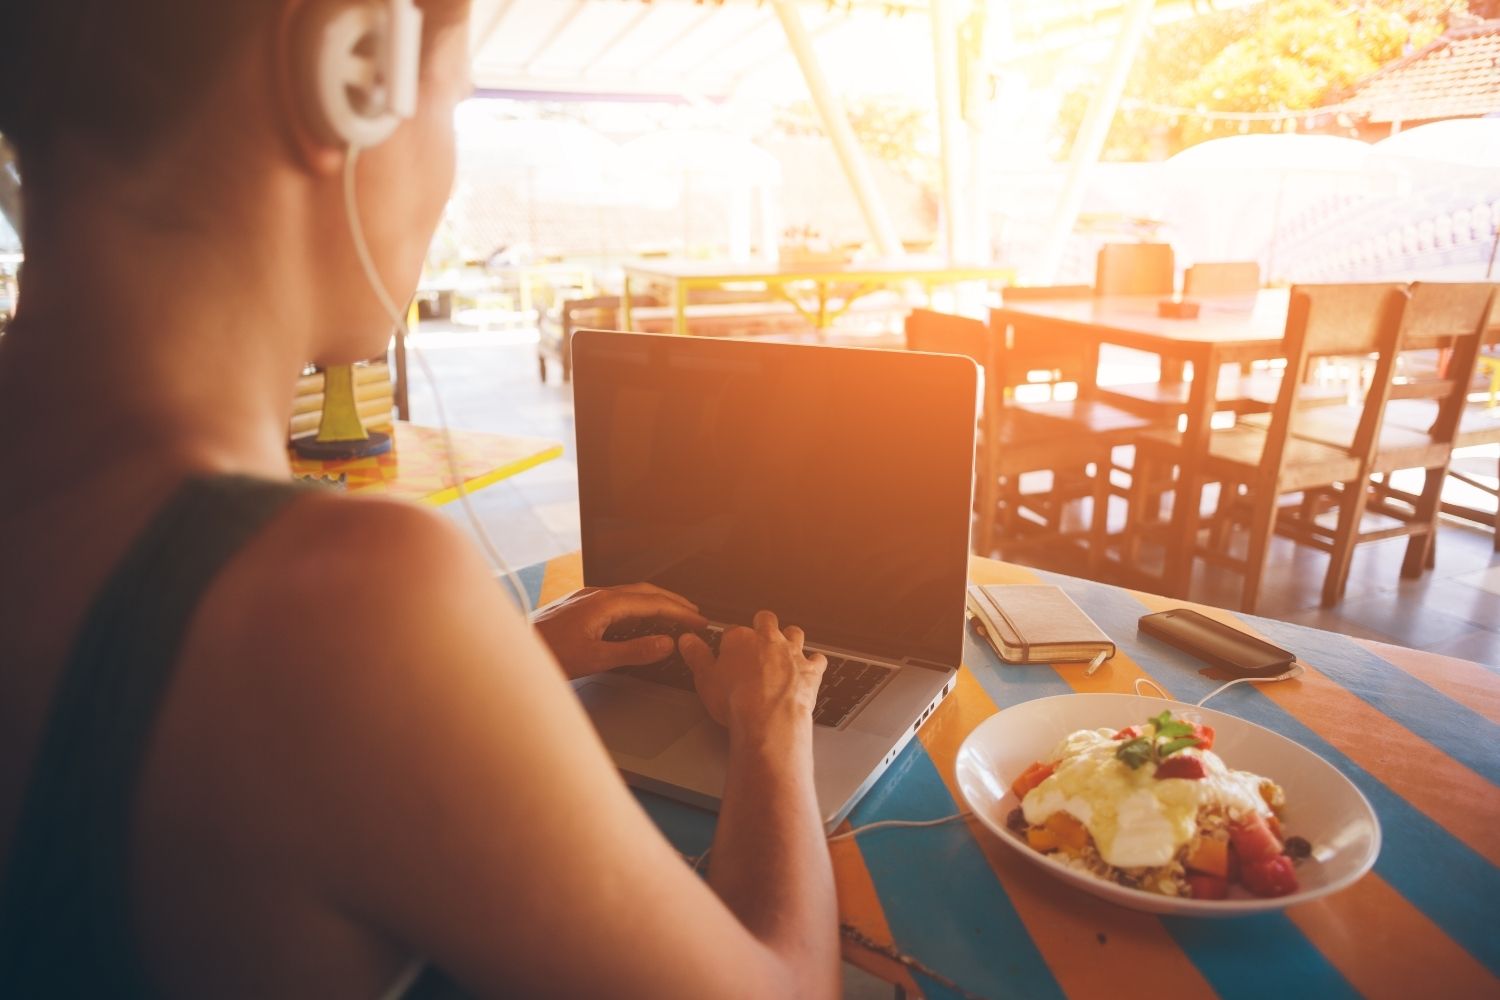 How To Start Working Remotely Even If You Don't Have Any Experience 37